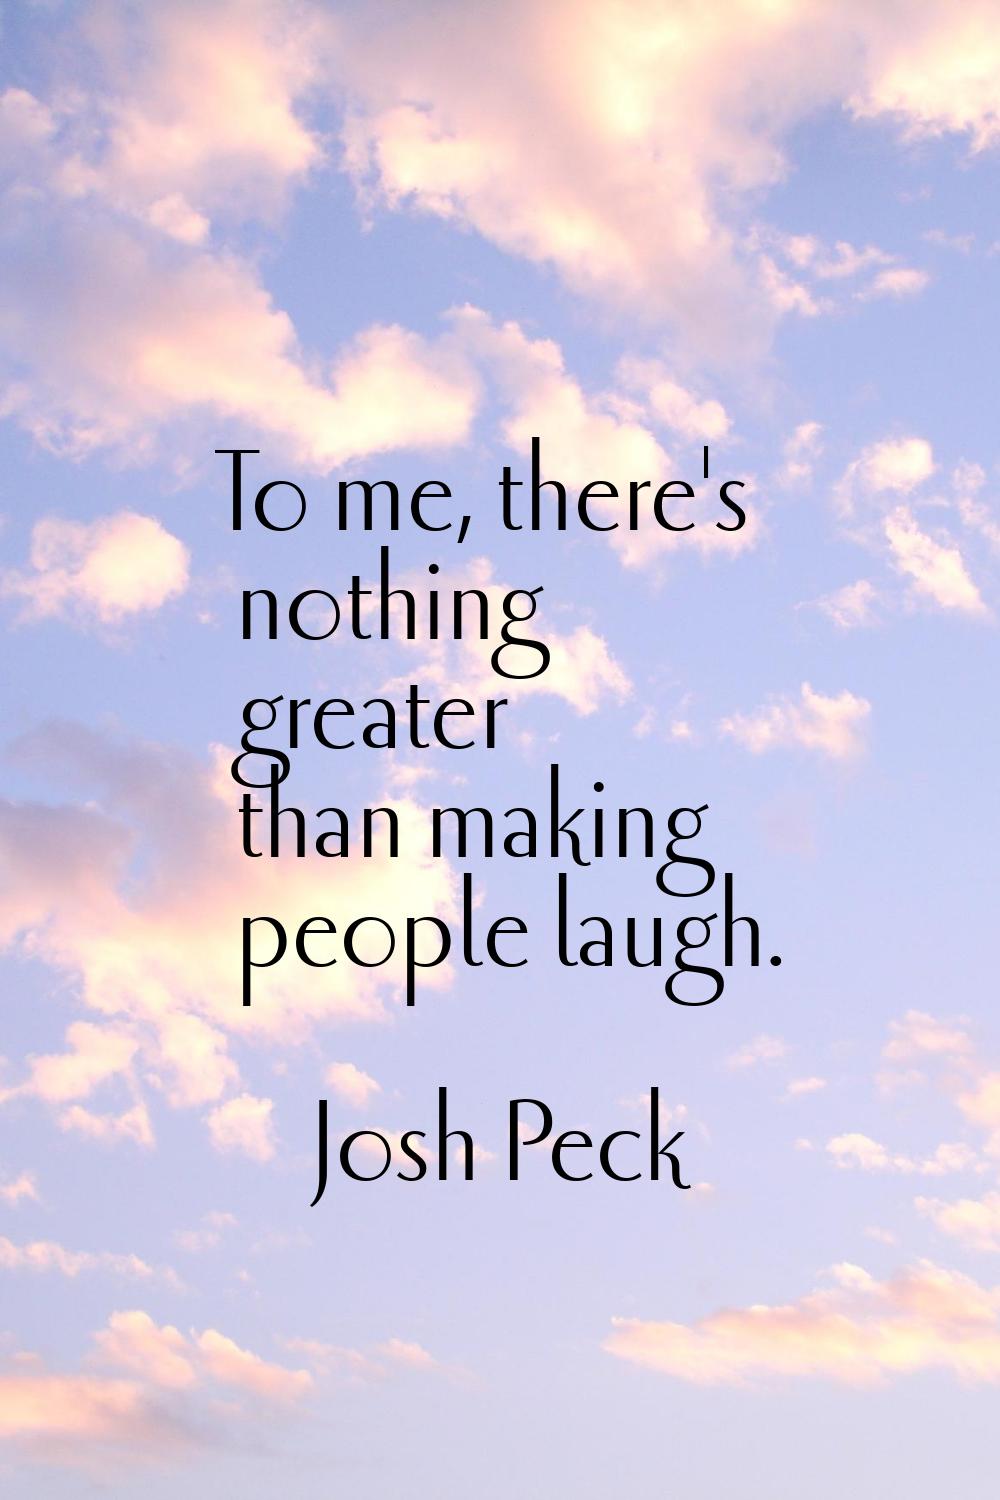 To me, there's nothing greater than making people laugh.